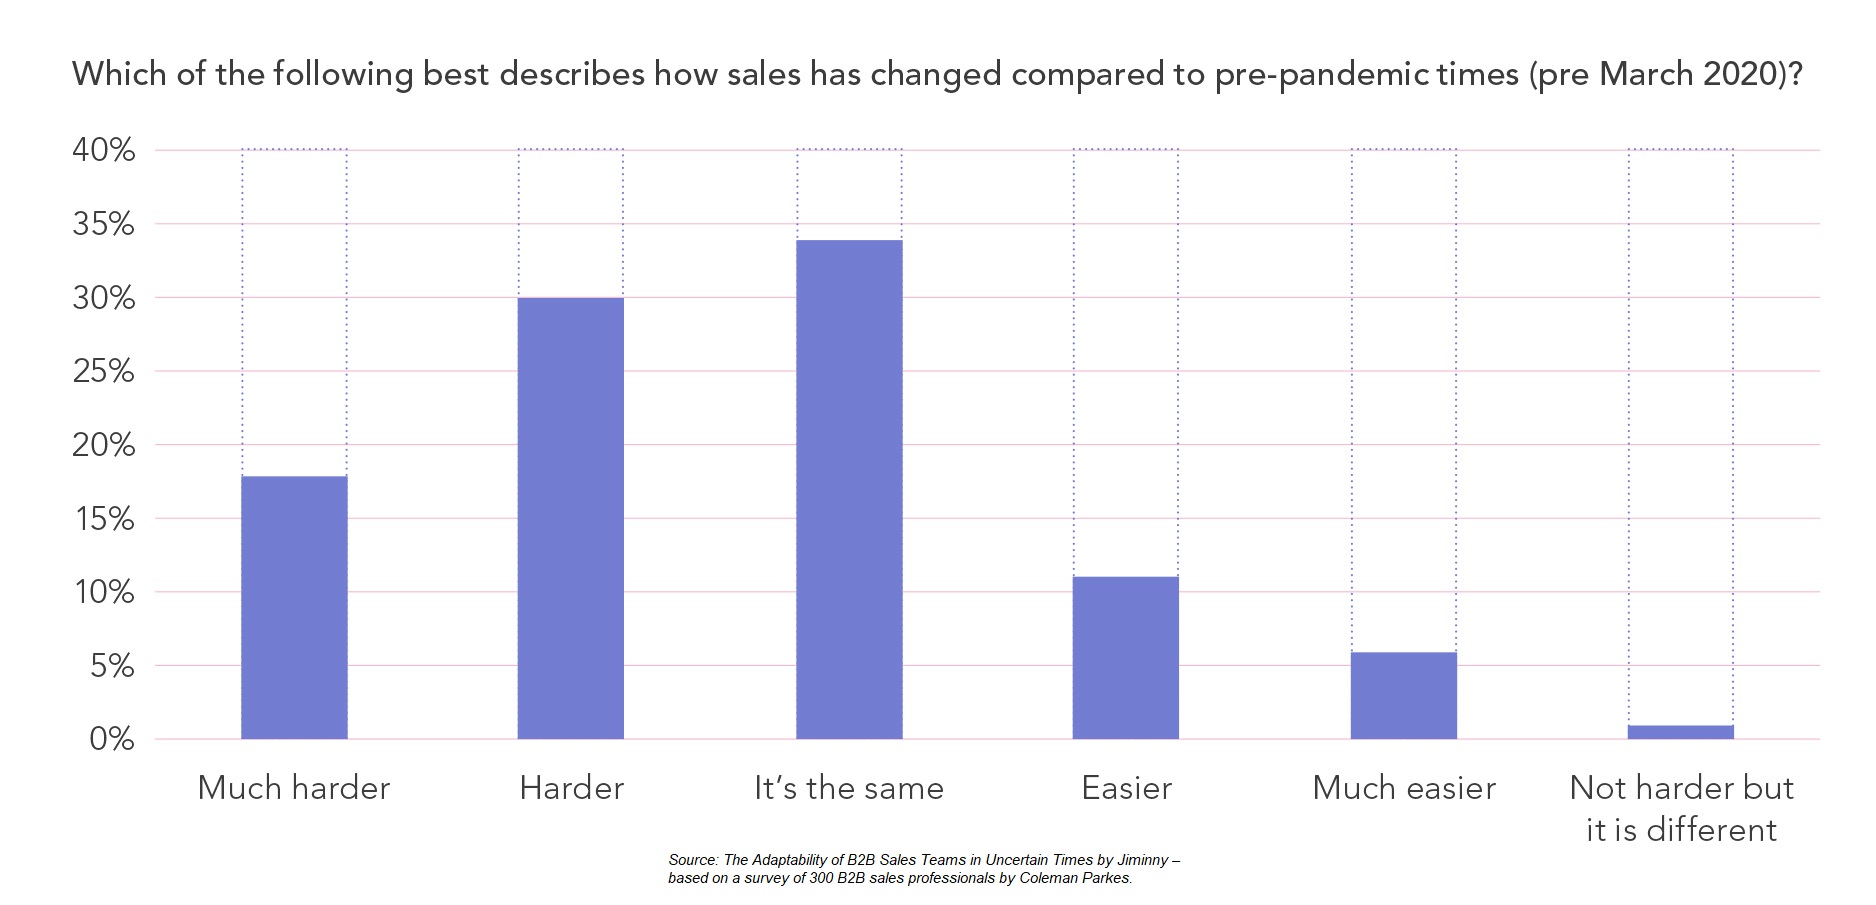 48% of respondents say B2B sales is harder compared to pre-pandemic times.